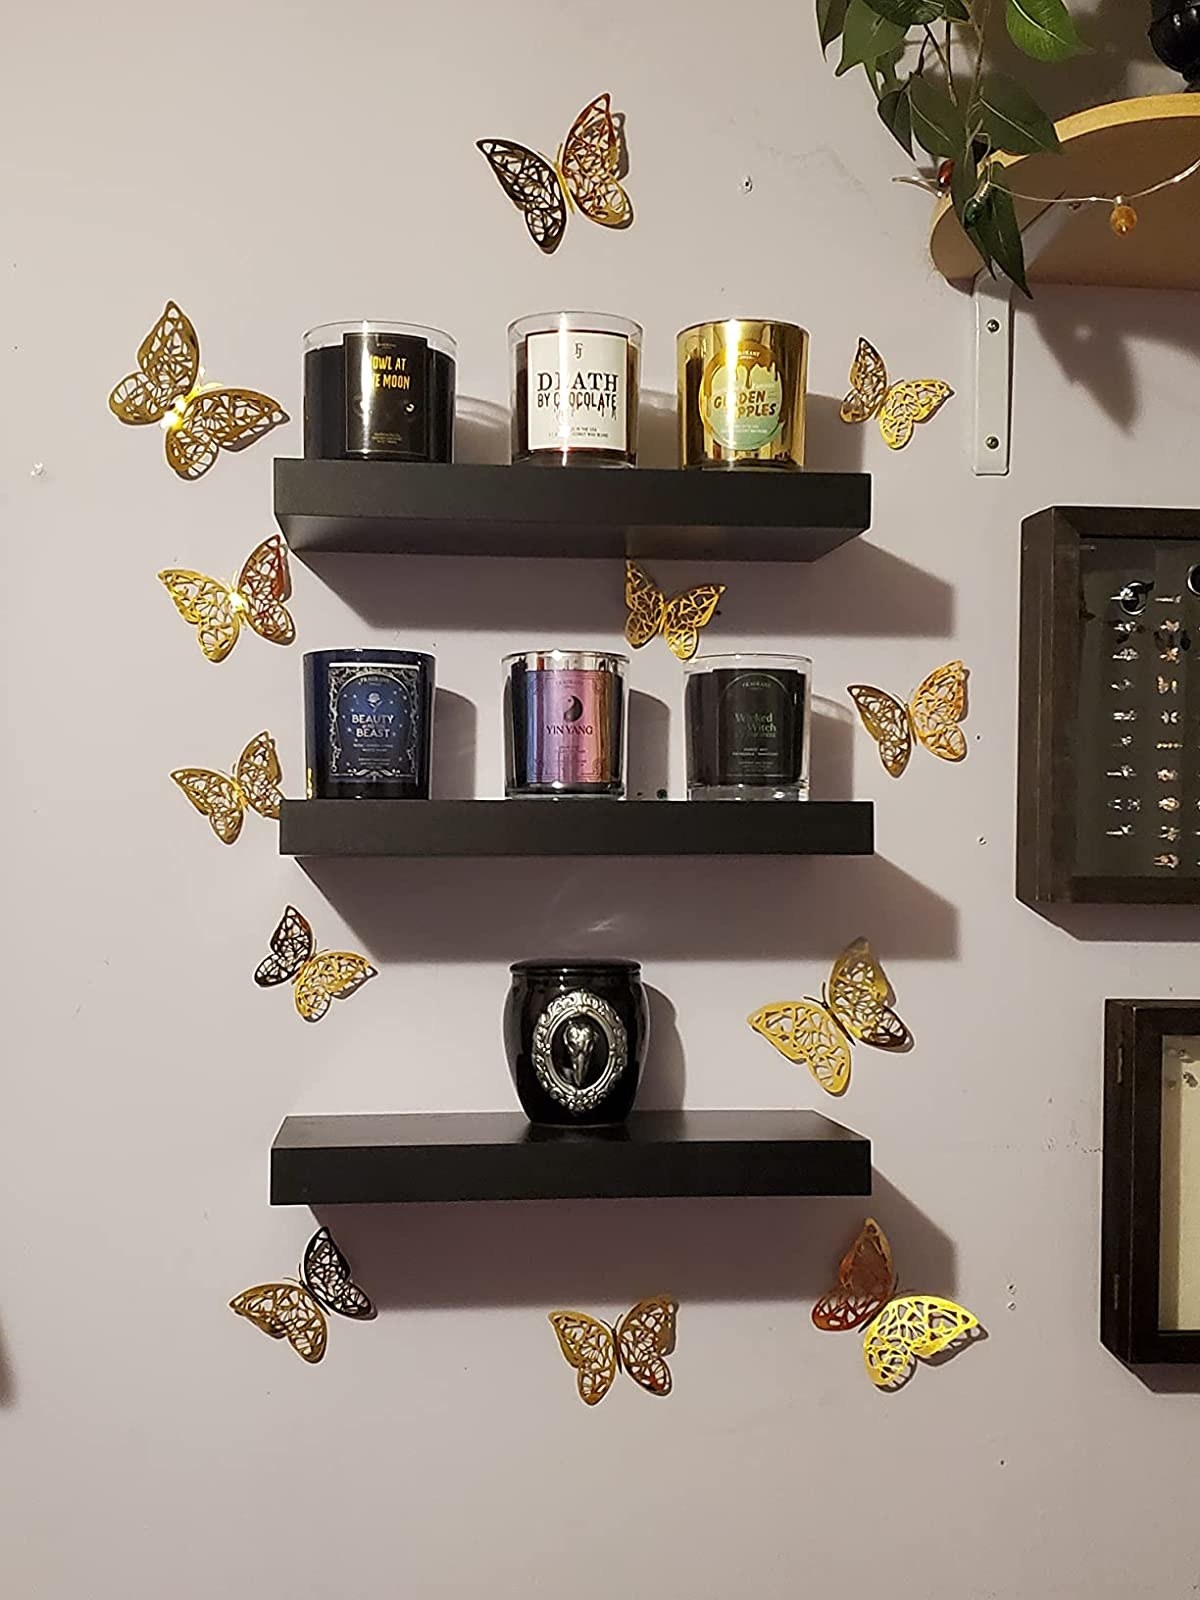 Black floating shelves holding candles, surrounding by gold butterfly wall decals